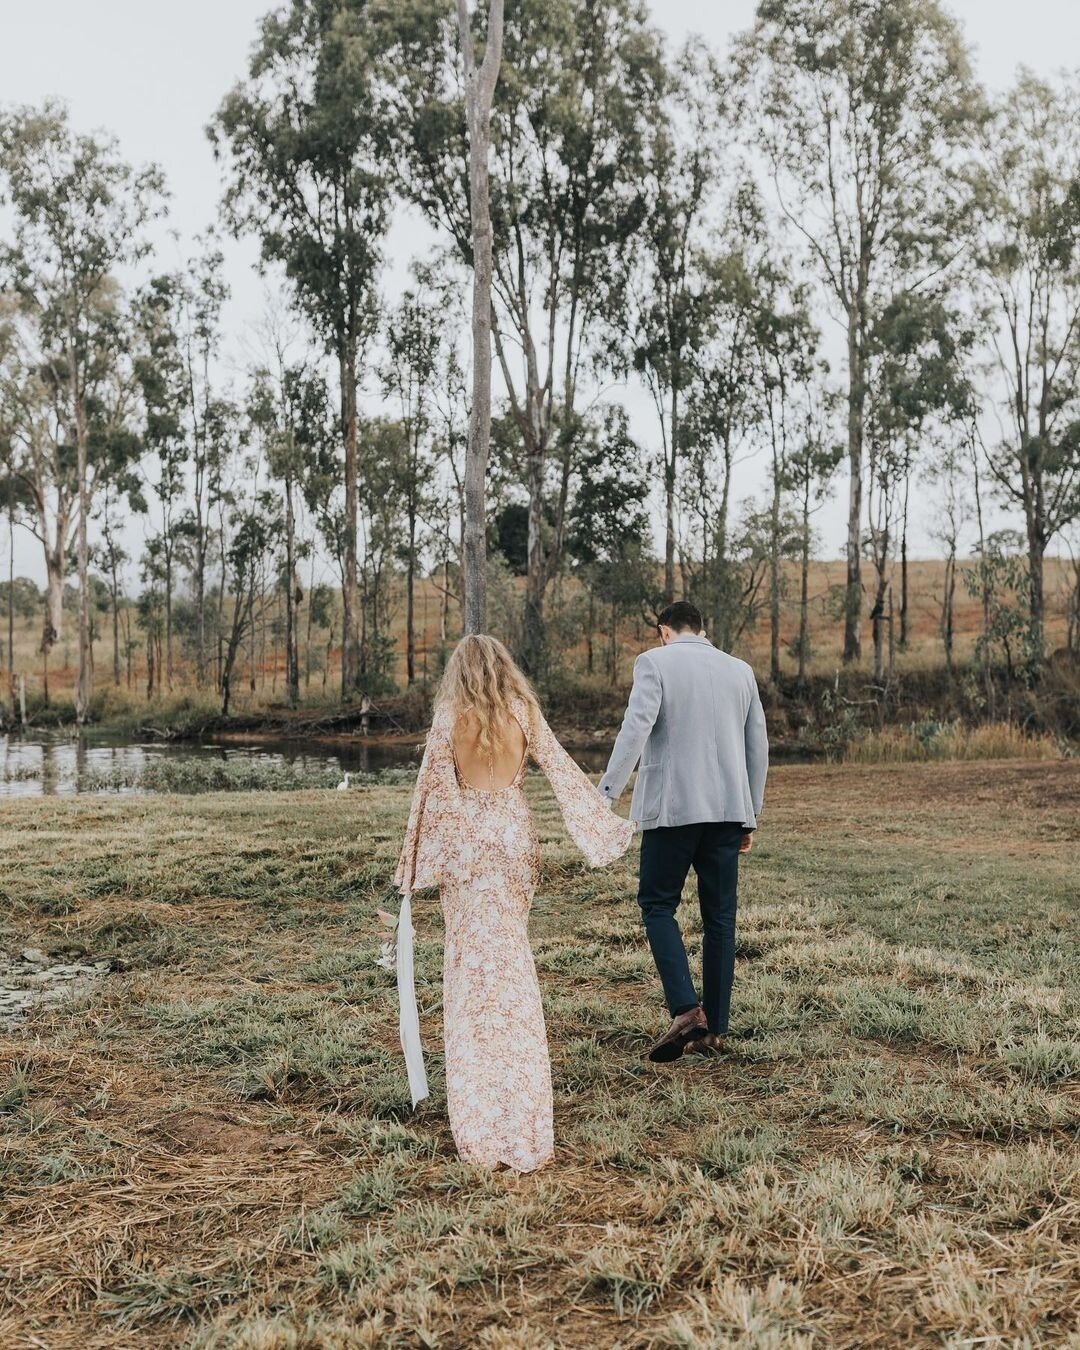 We will always have a soft spot for intimate elopements, especially ones with boho vibes in the heart of Australia's Scenic Rim. #inspiration